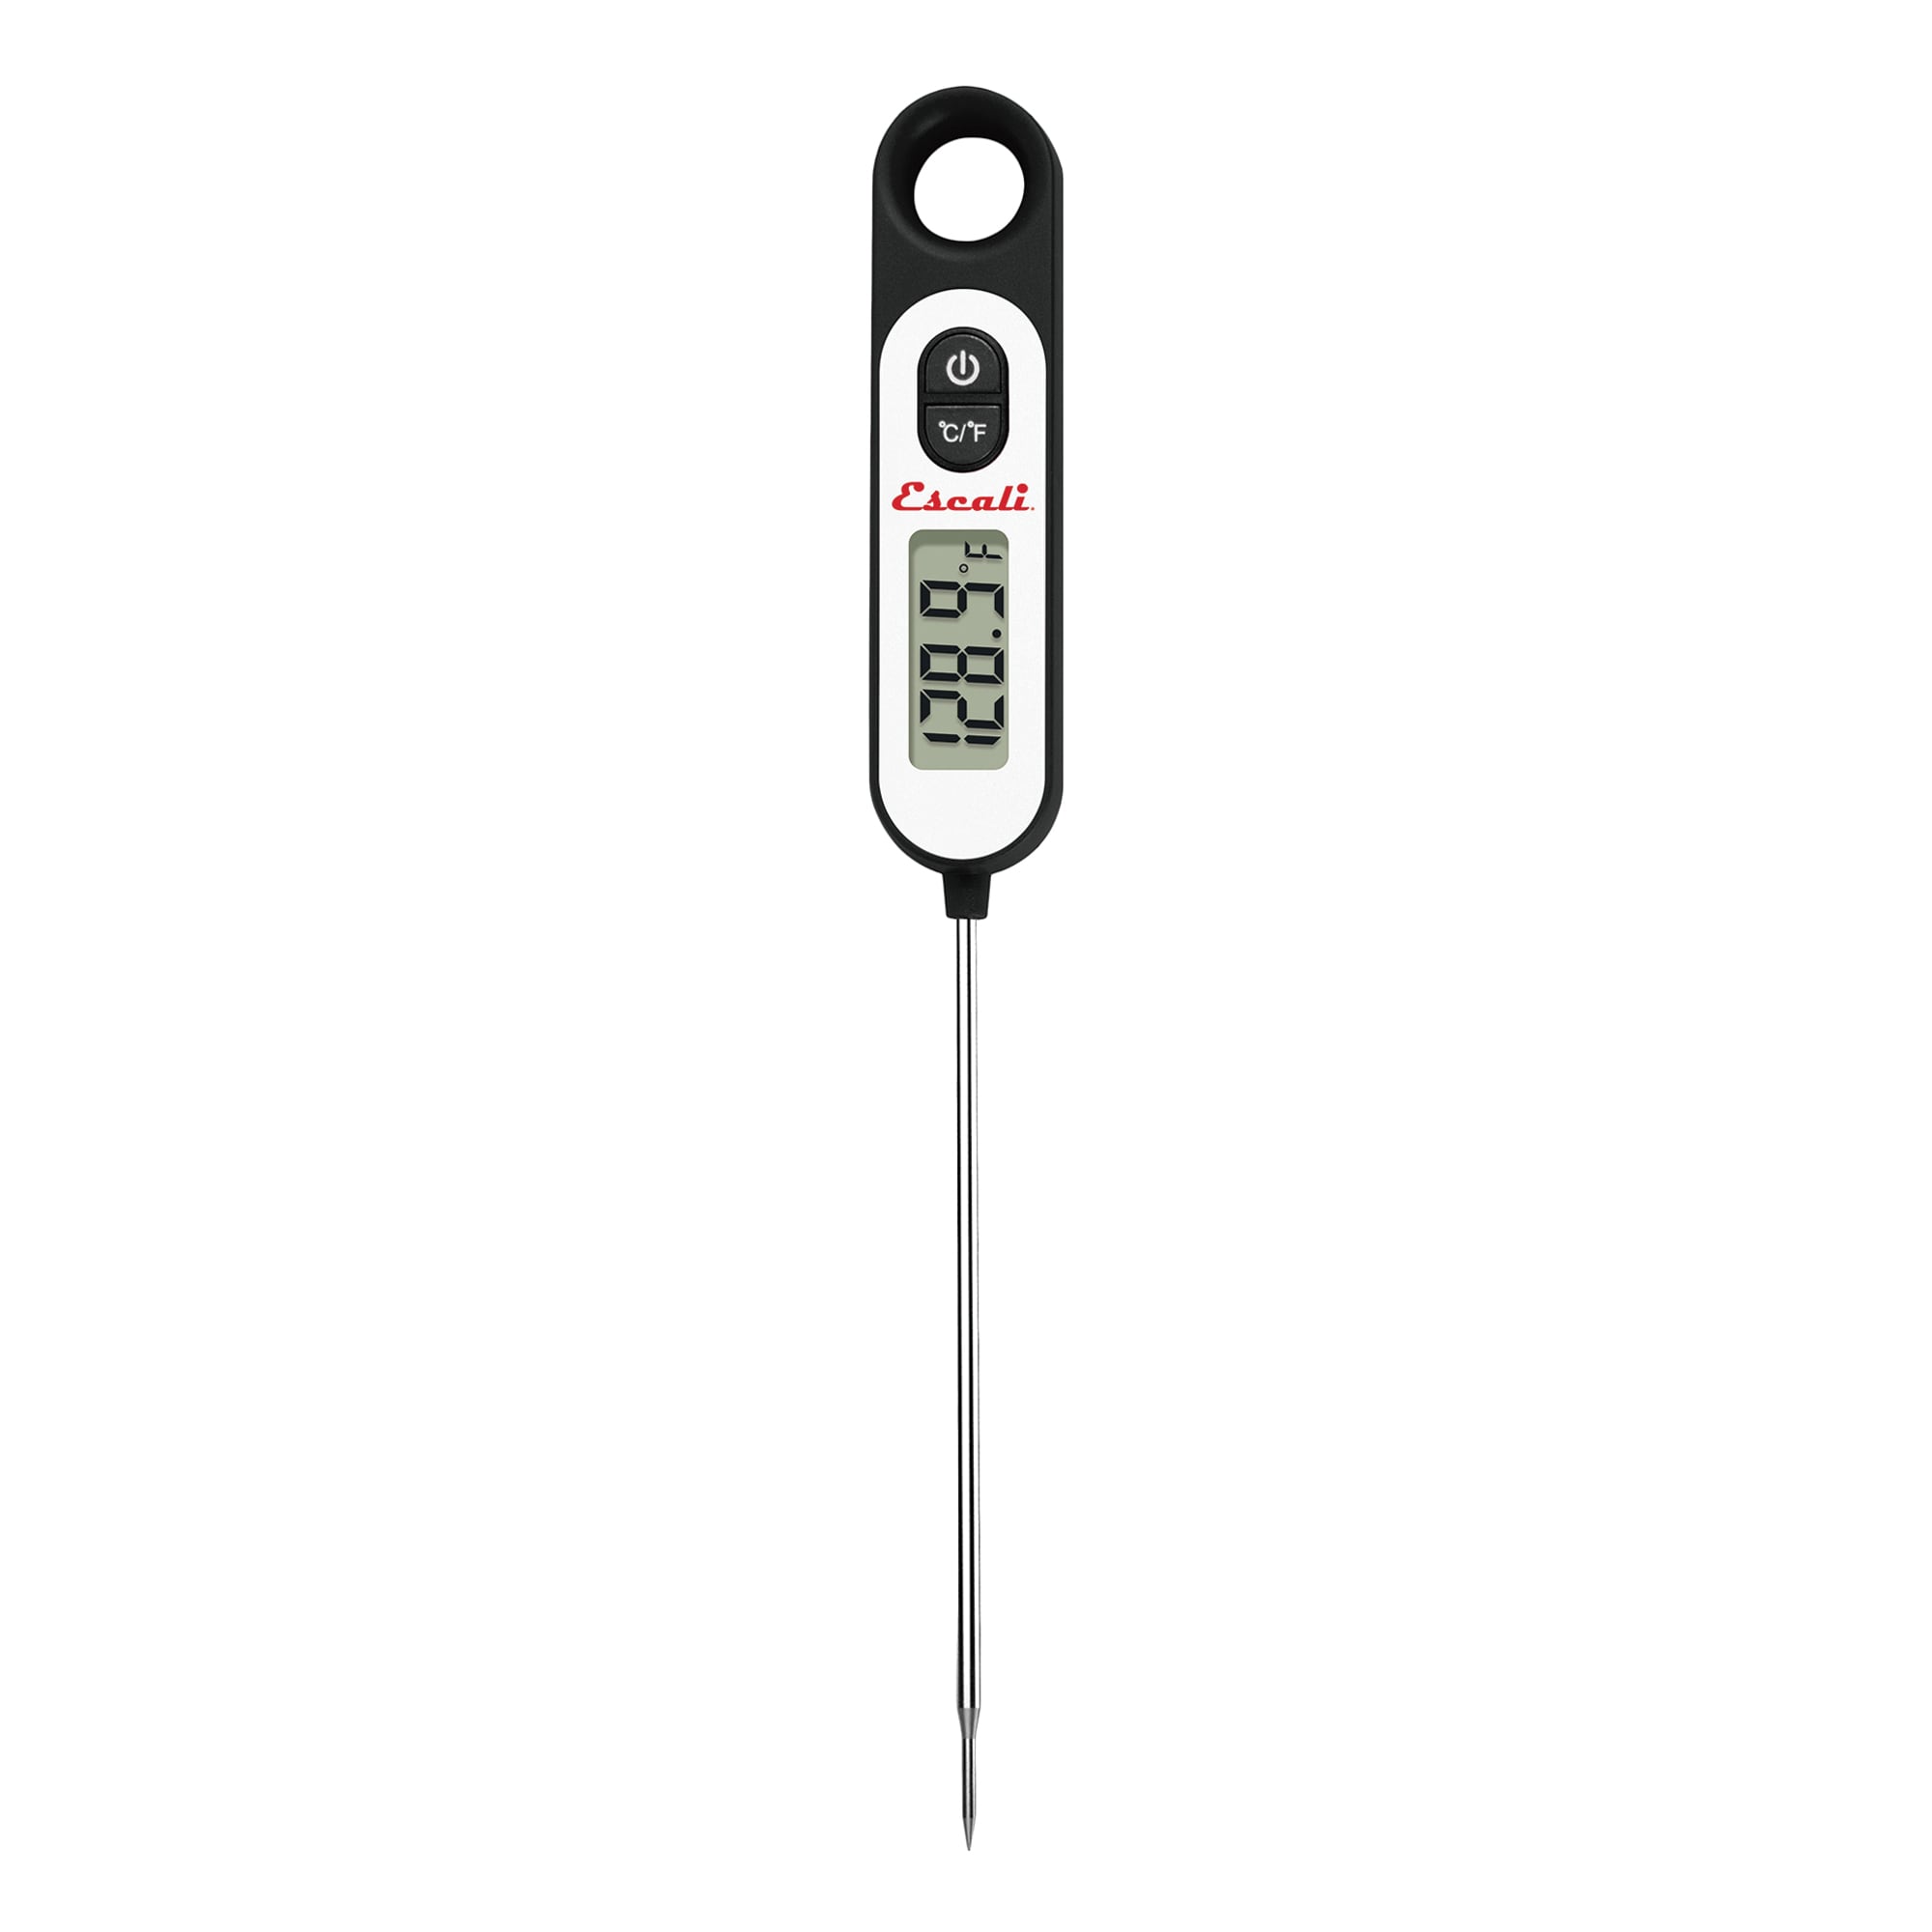 Escali Oven Safe Meat Thermometer - 0°F (-17.8°C) to 220°F (104.4°C) - Easy  to Read, Durable, Dishwasher Safe, Large Display, Shatter Proof, Pot Clip